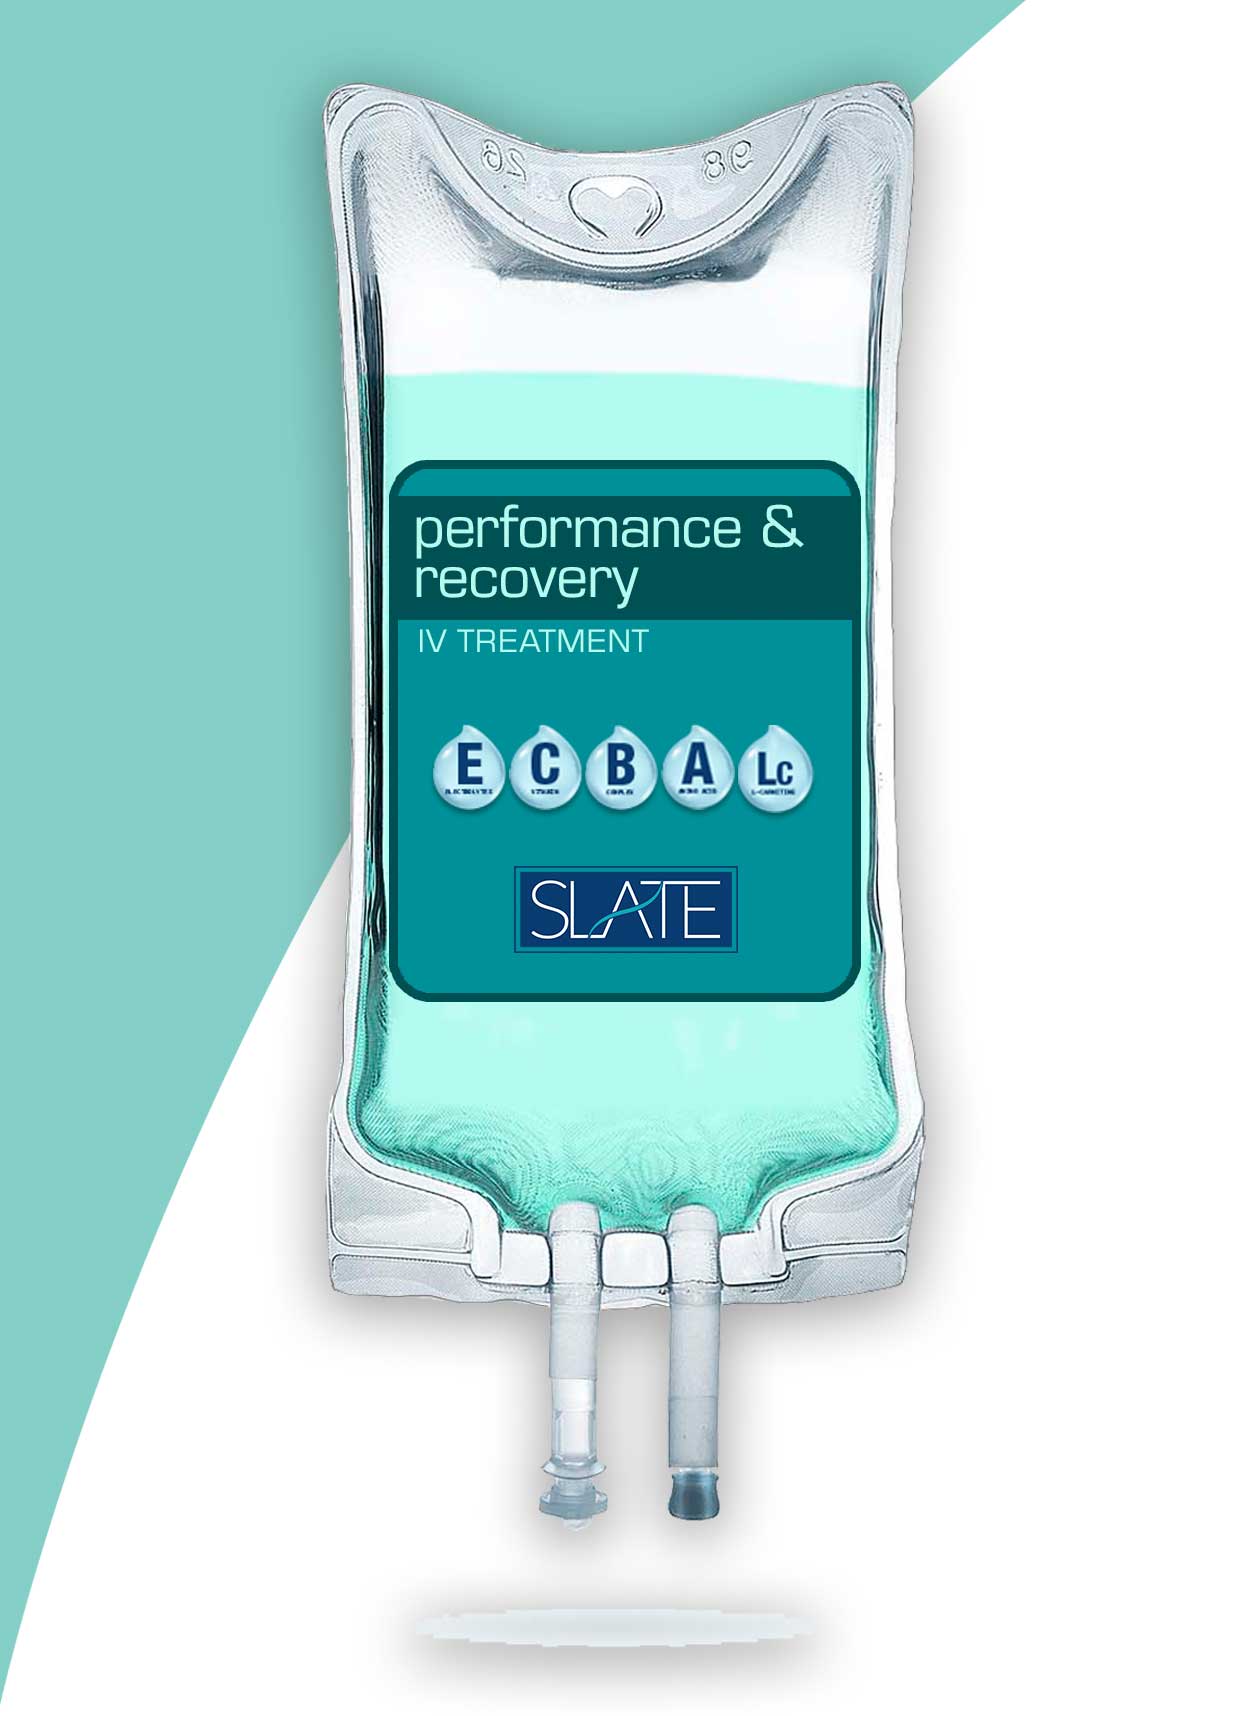 iv-bag-performance-recovery